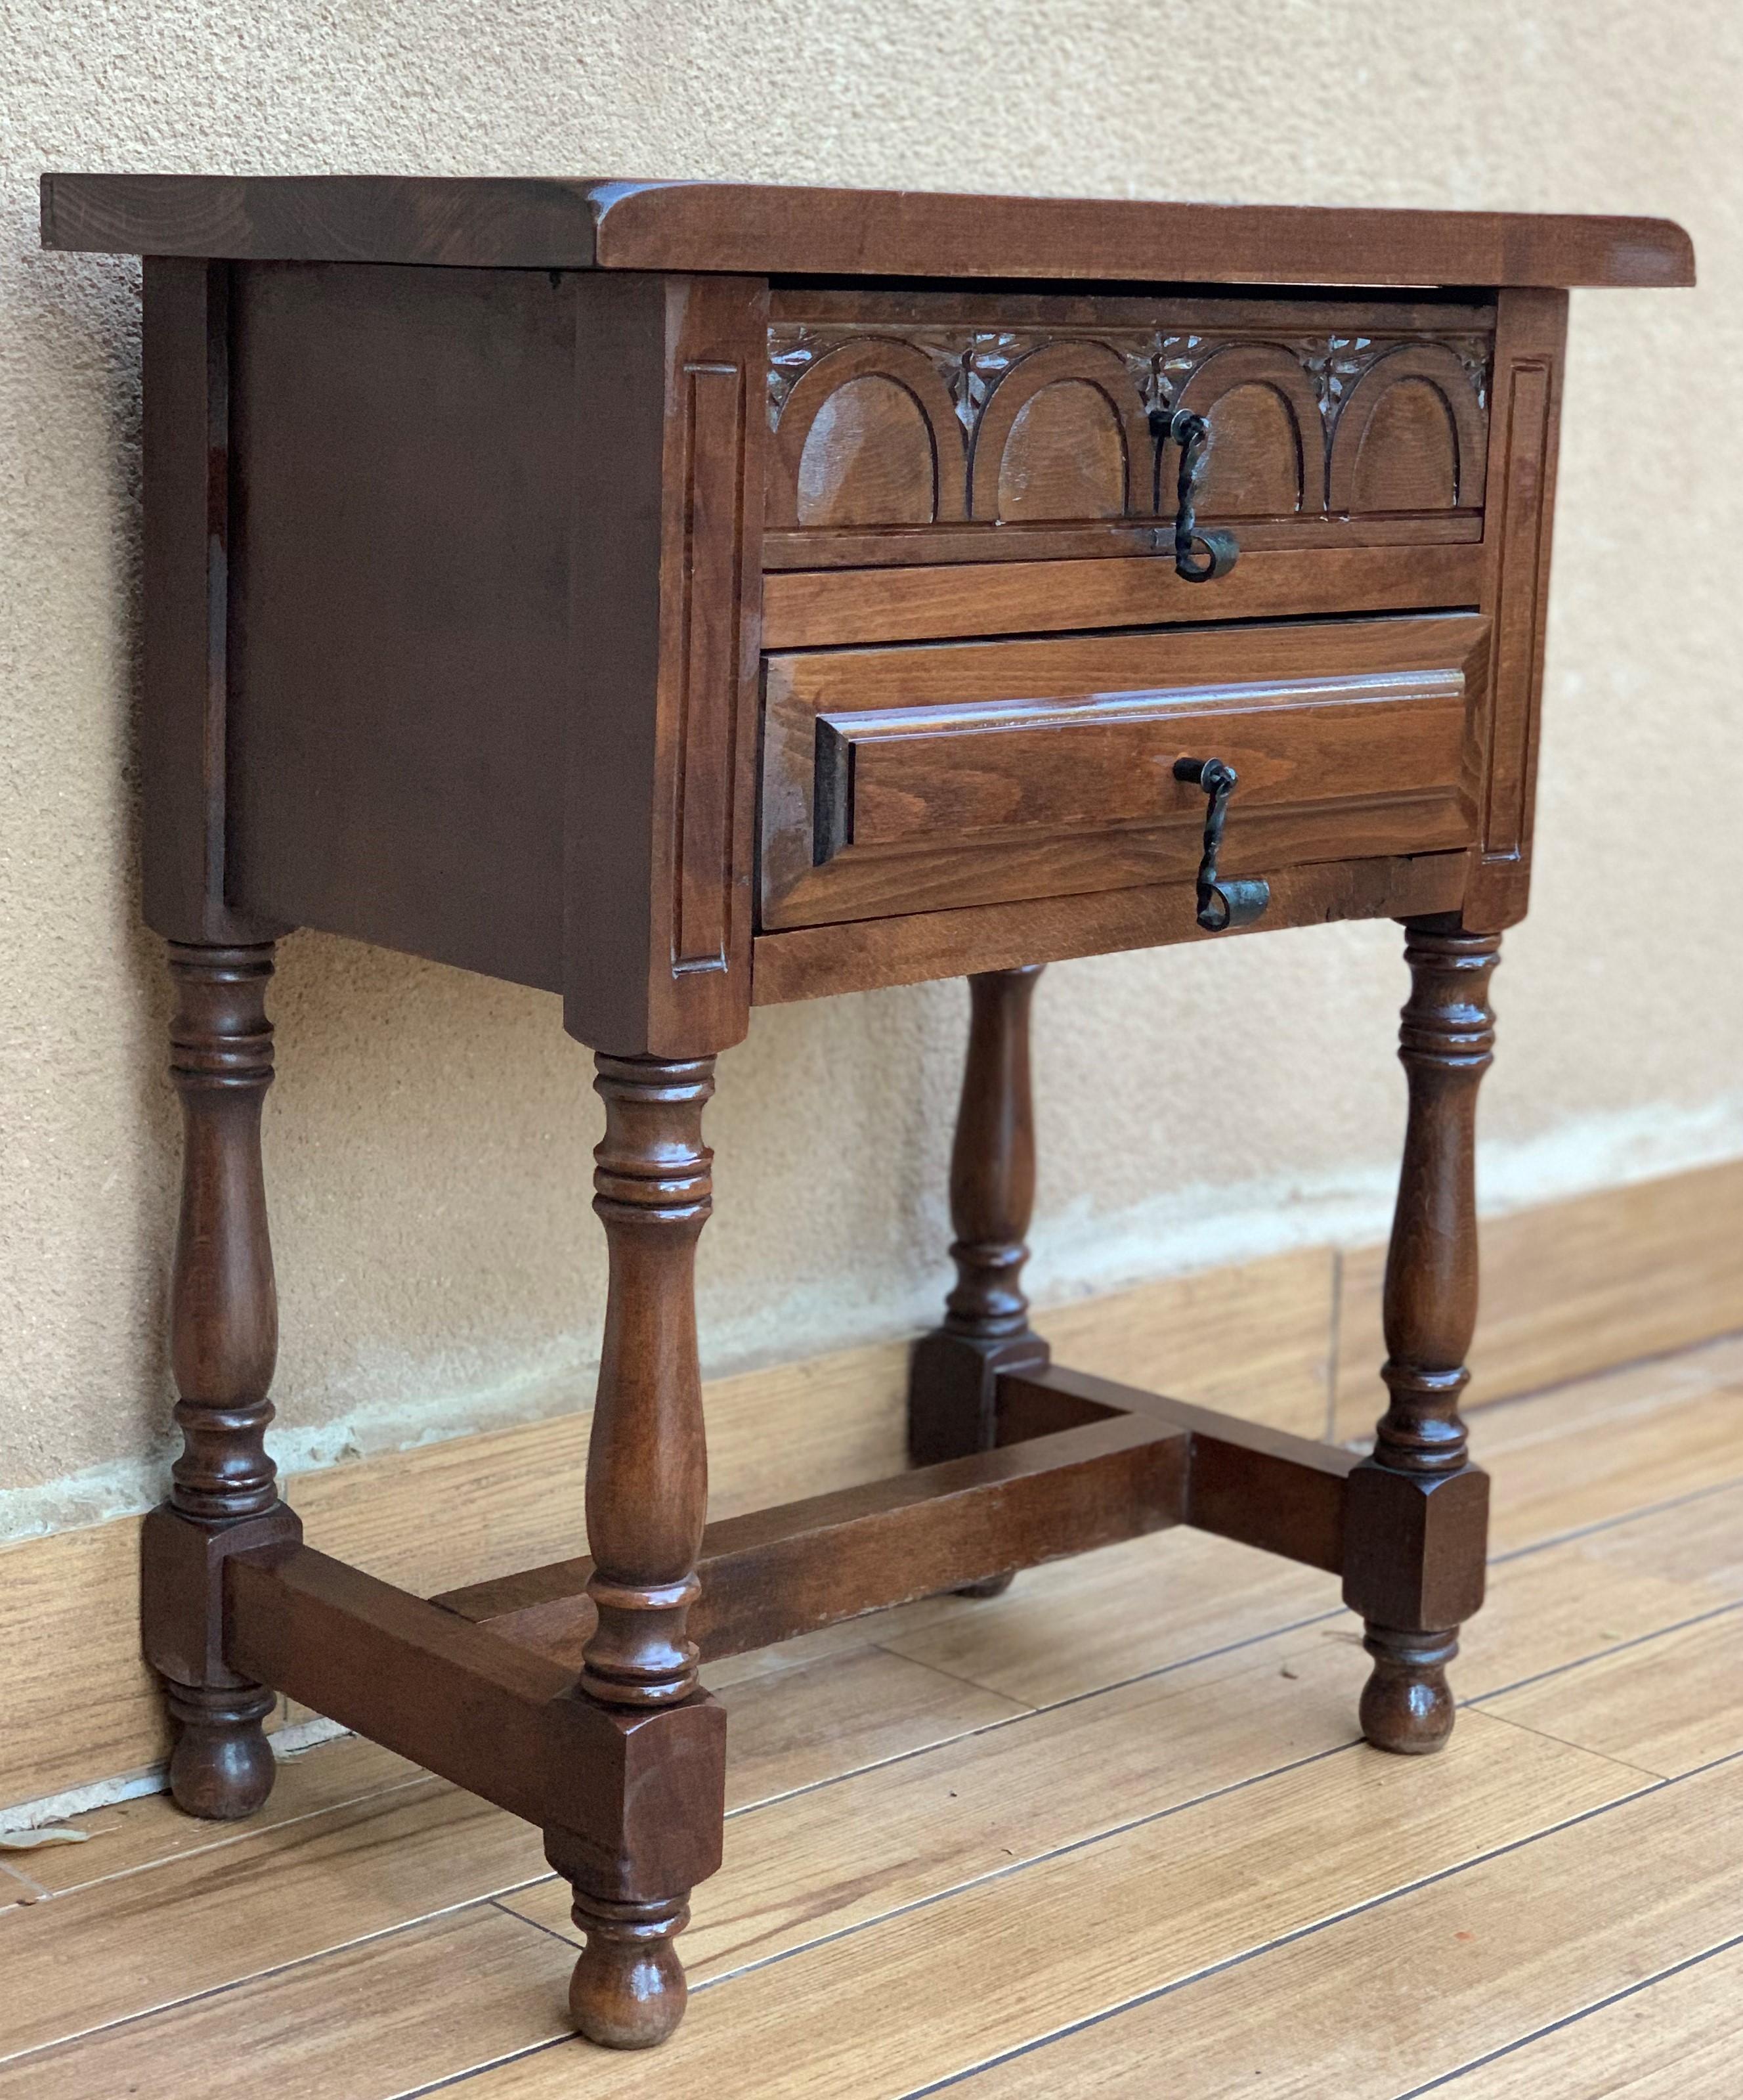 20th century pair of Spanish nightstands with two carved drawers and iron hardware.
Beautiful tables that you can use like a nightstands or side tables, end tables... or table lamp.